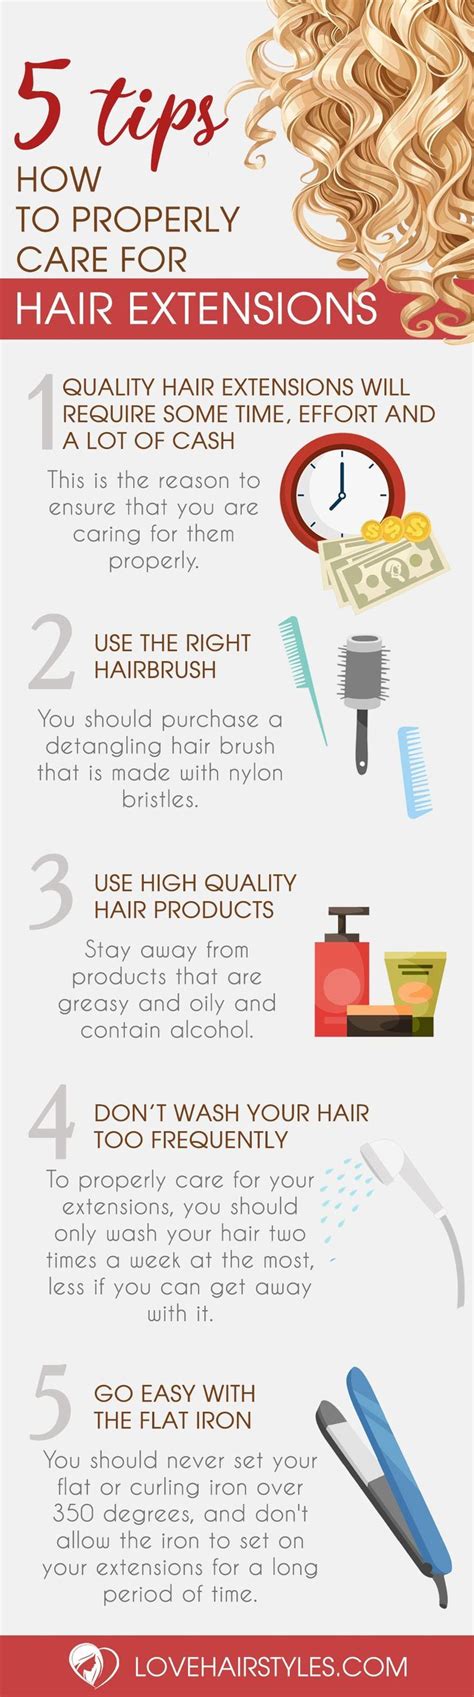 How To Care For Hair Extensions Hair Extensions